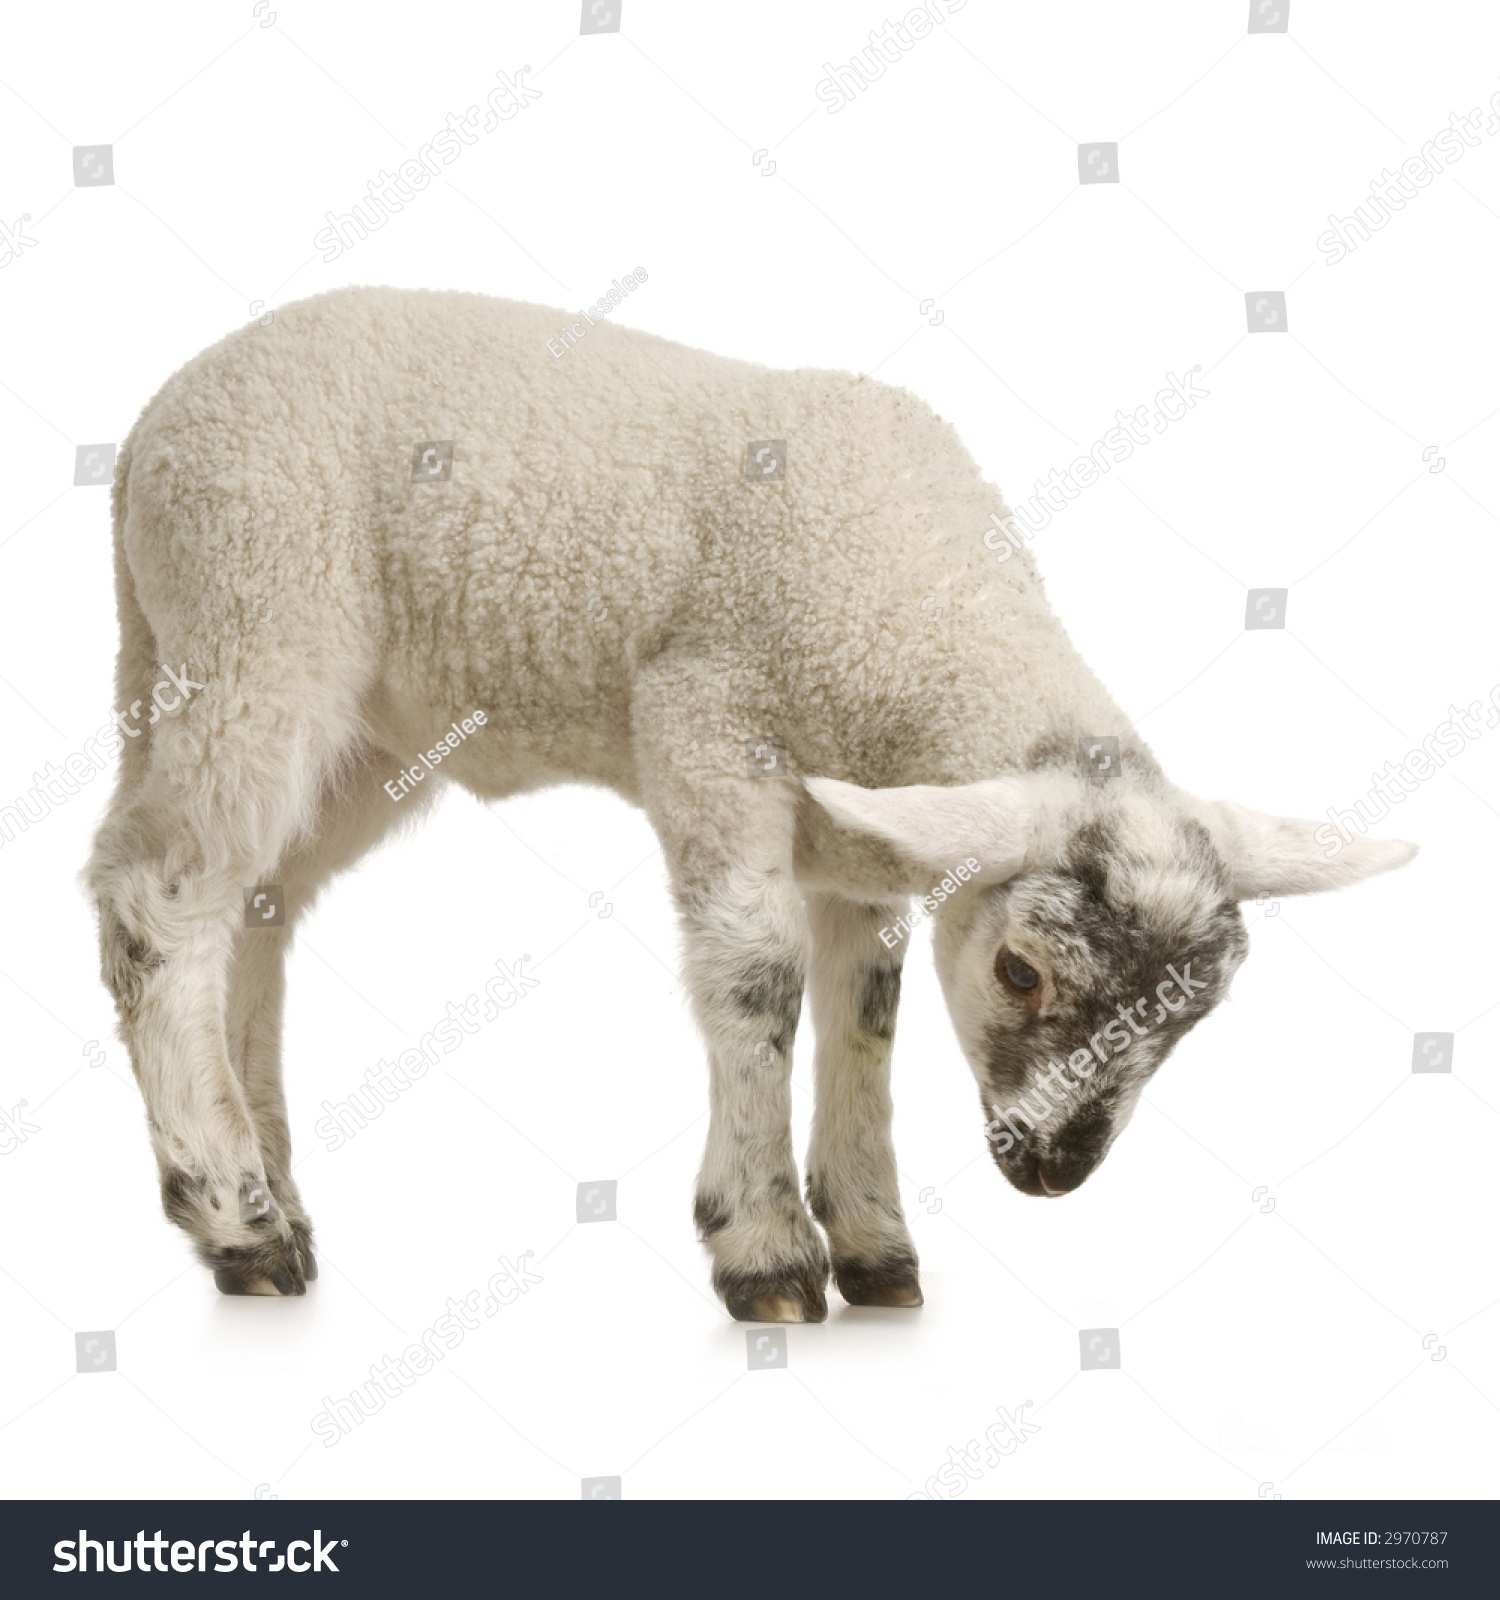 Lamb looking down, isolated on a white background